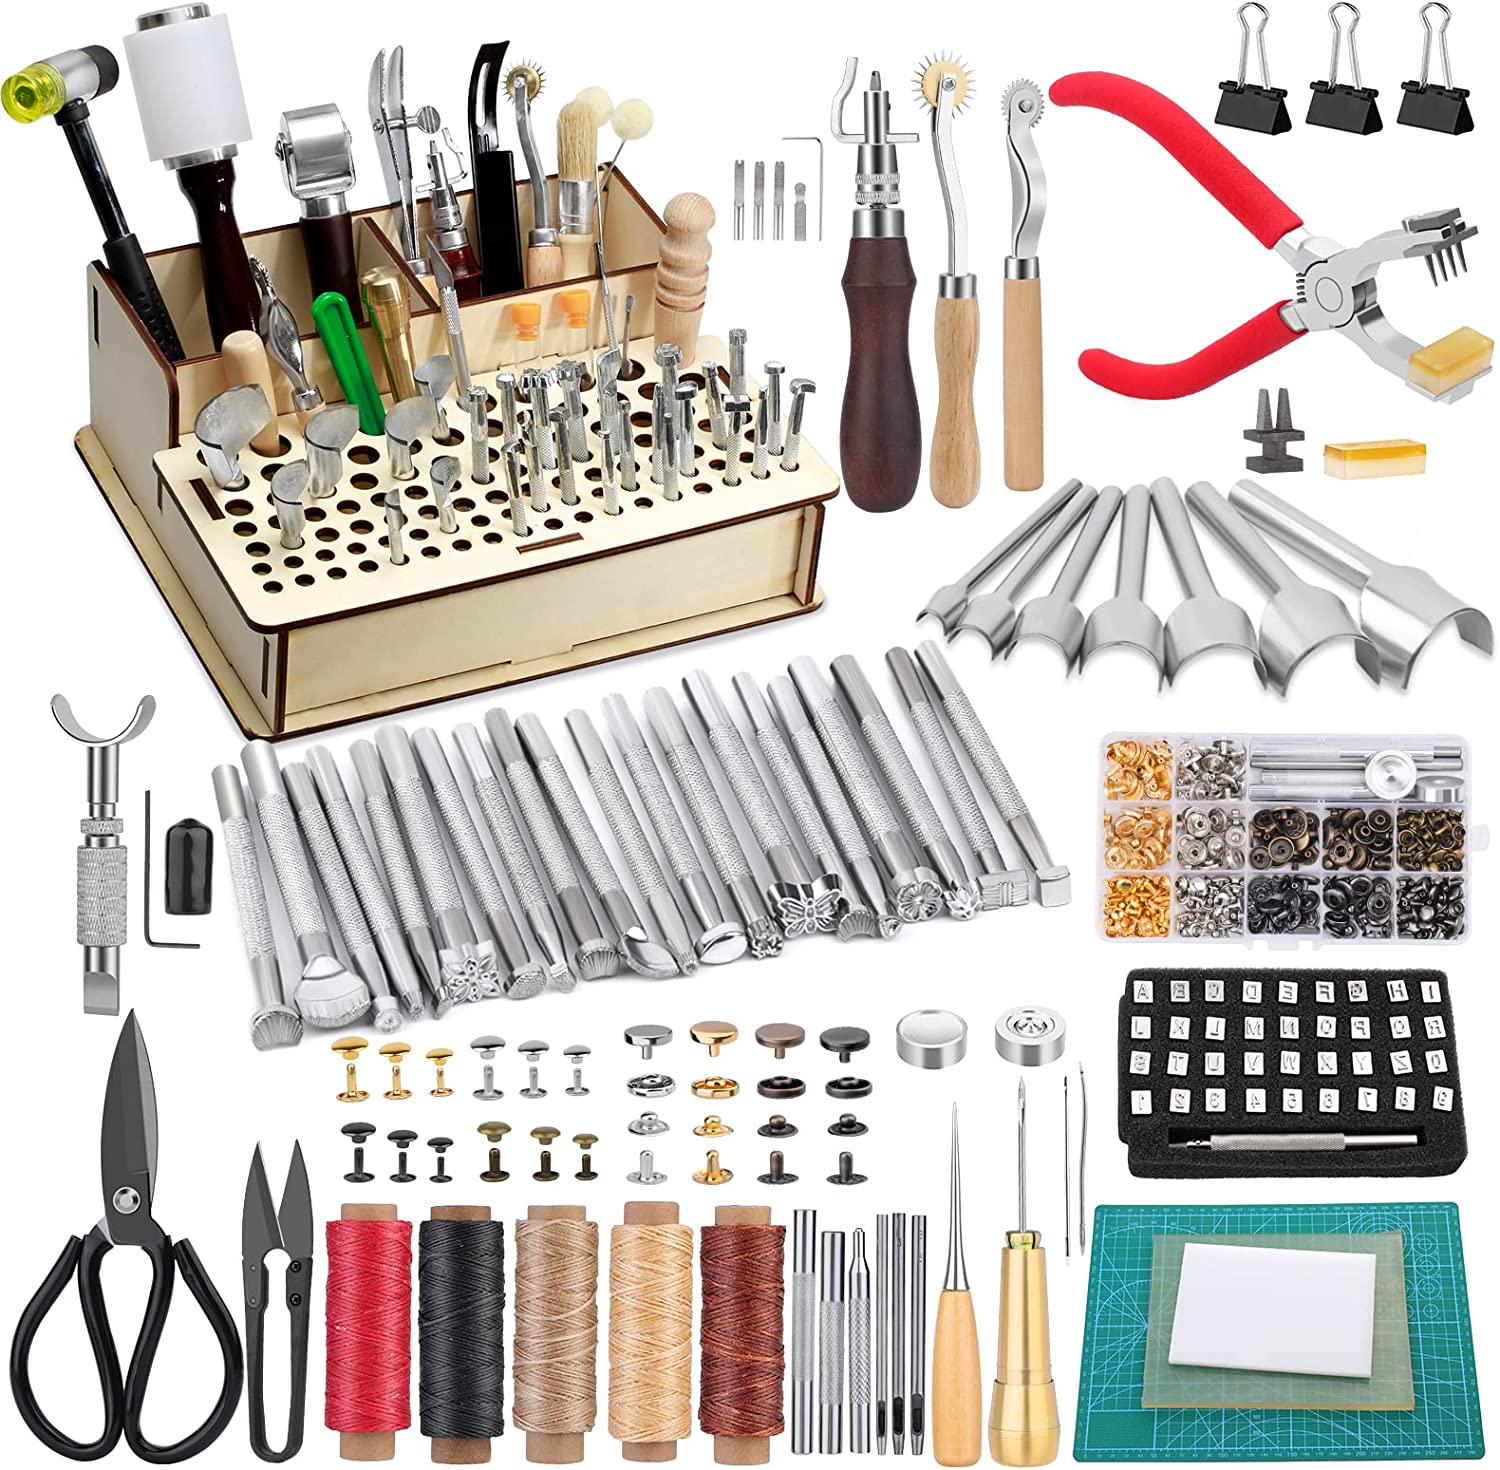 Mayboos Simple Install Leather Working Tools Supply Kit, 447-Piece